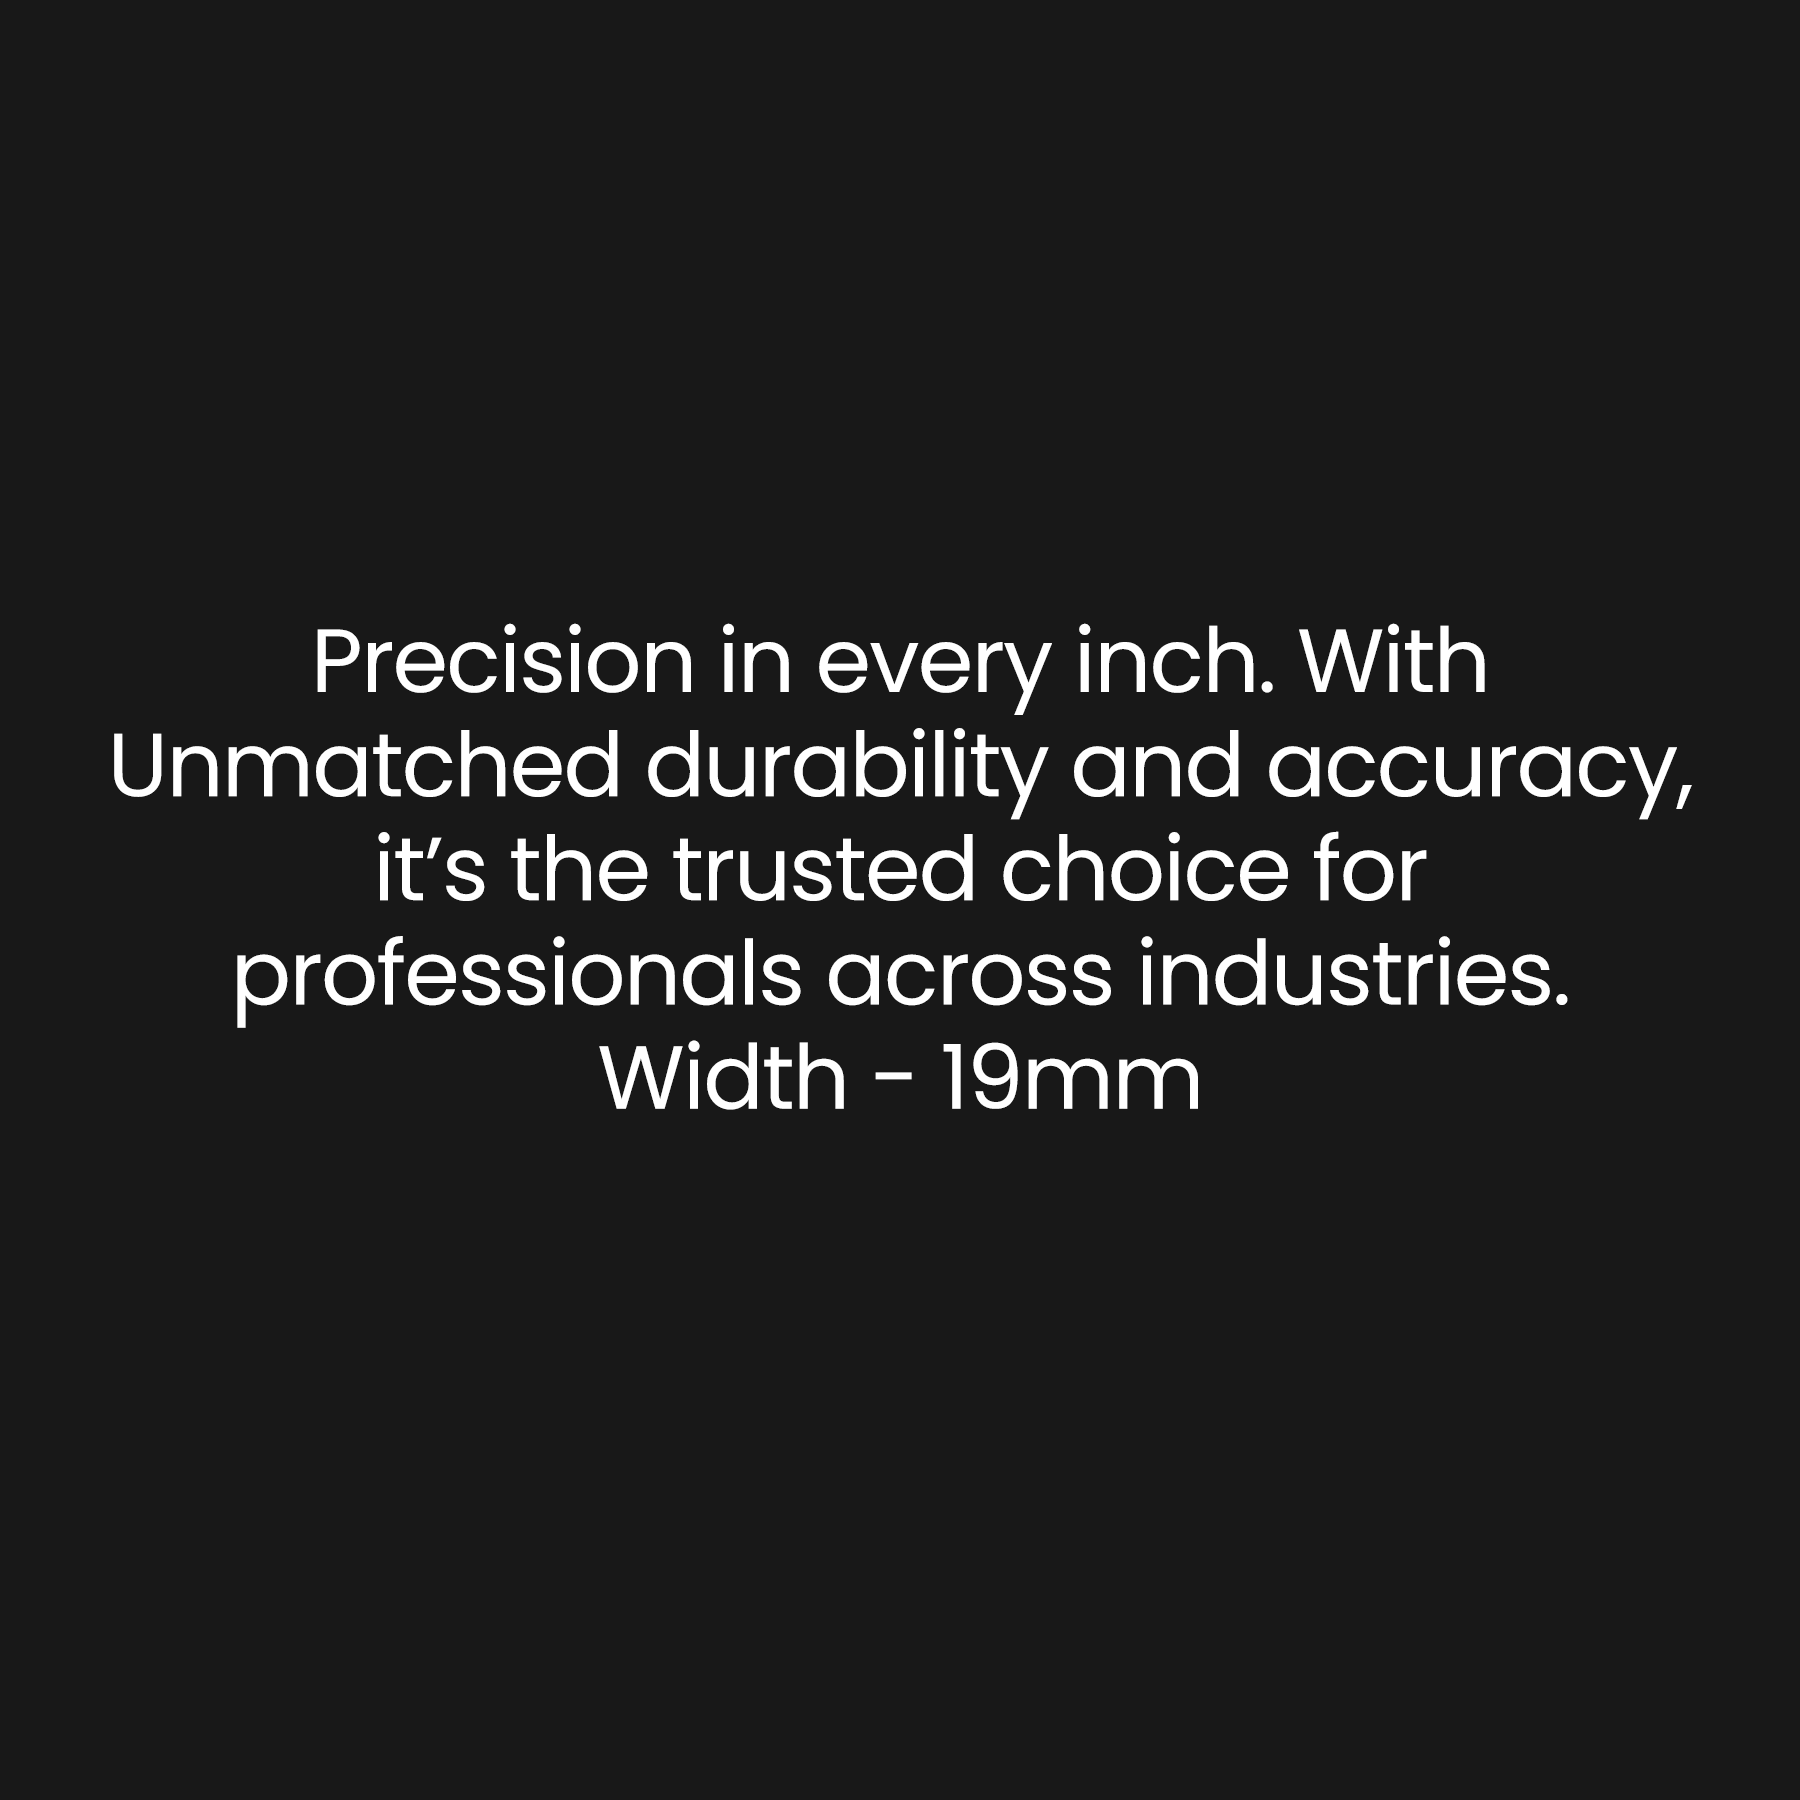 Prescision in every inch. With Unmatched durability and accuracy, It's the trusted choice for professionals accorss industries. Width - 19mm